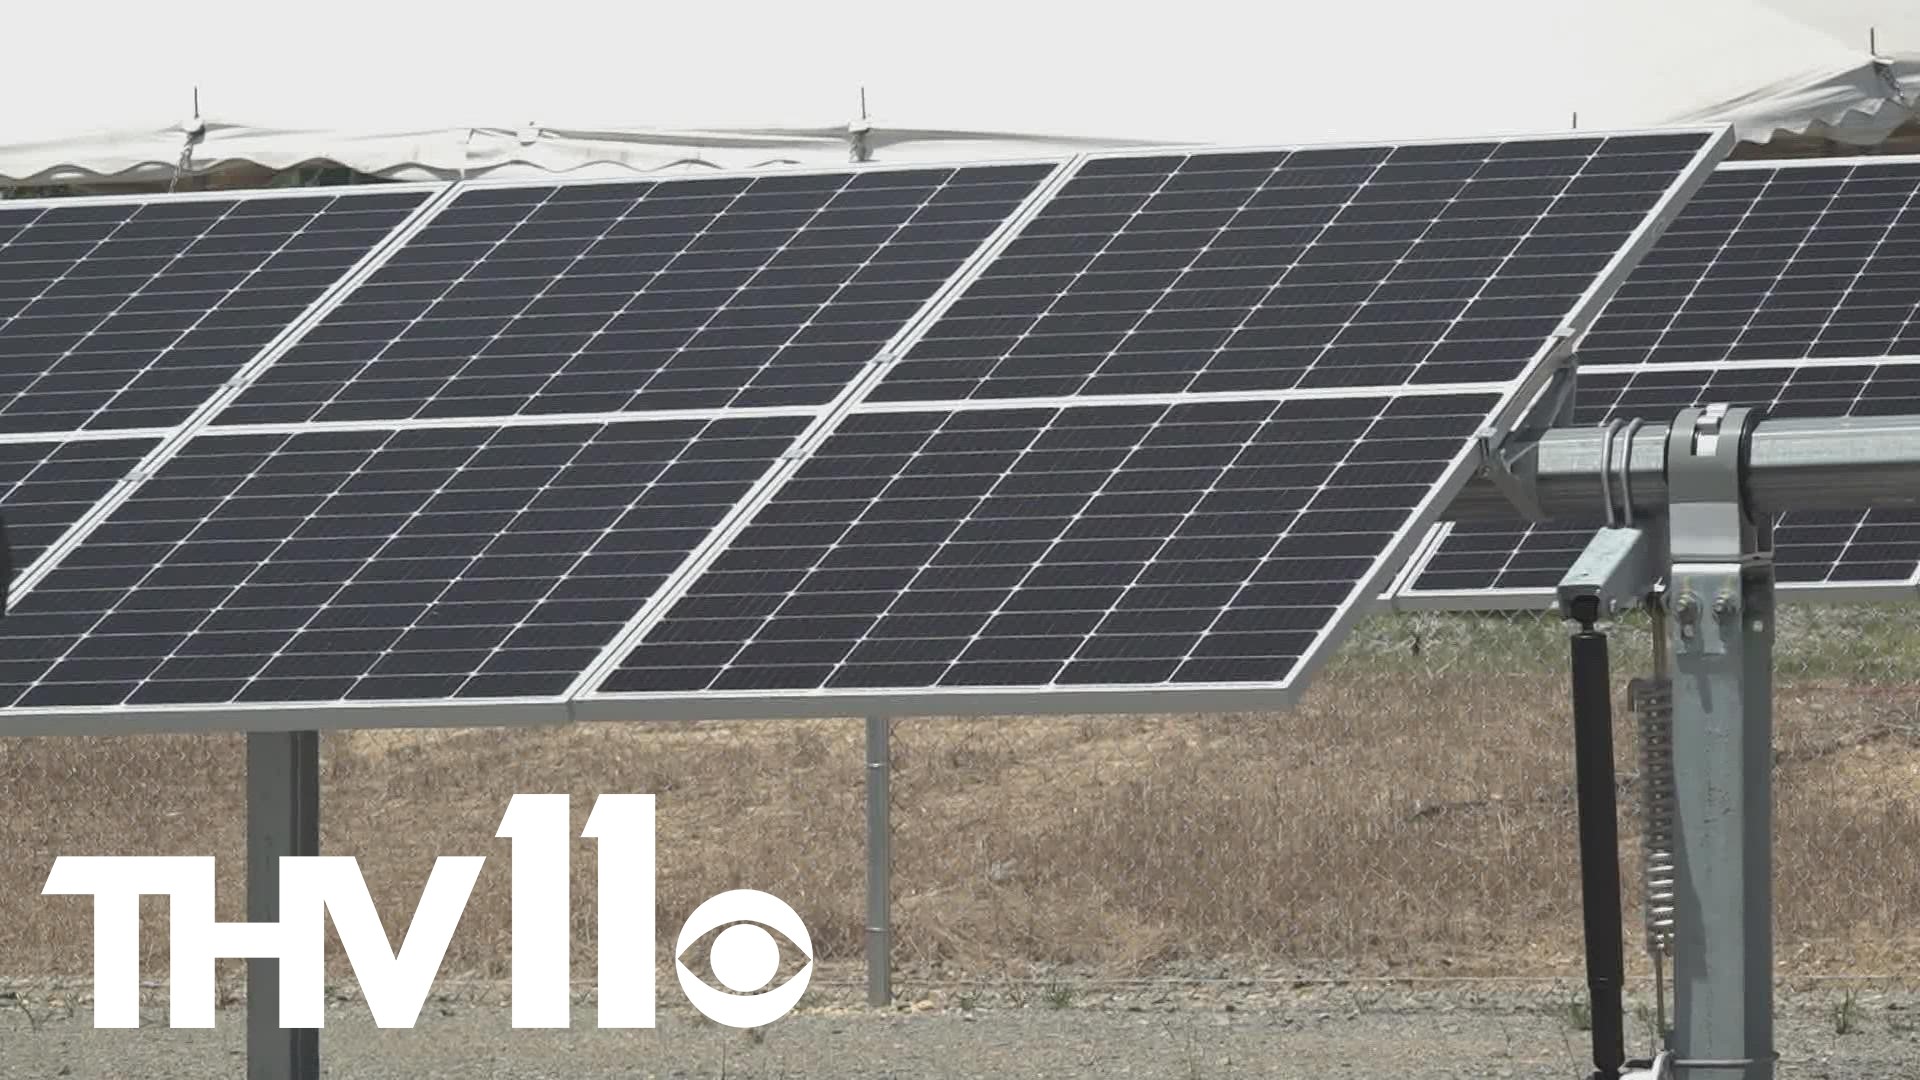 Saline County debuted a brand new five acre solar facility, which is their latest effort to help taxpayers save money.